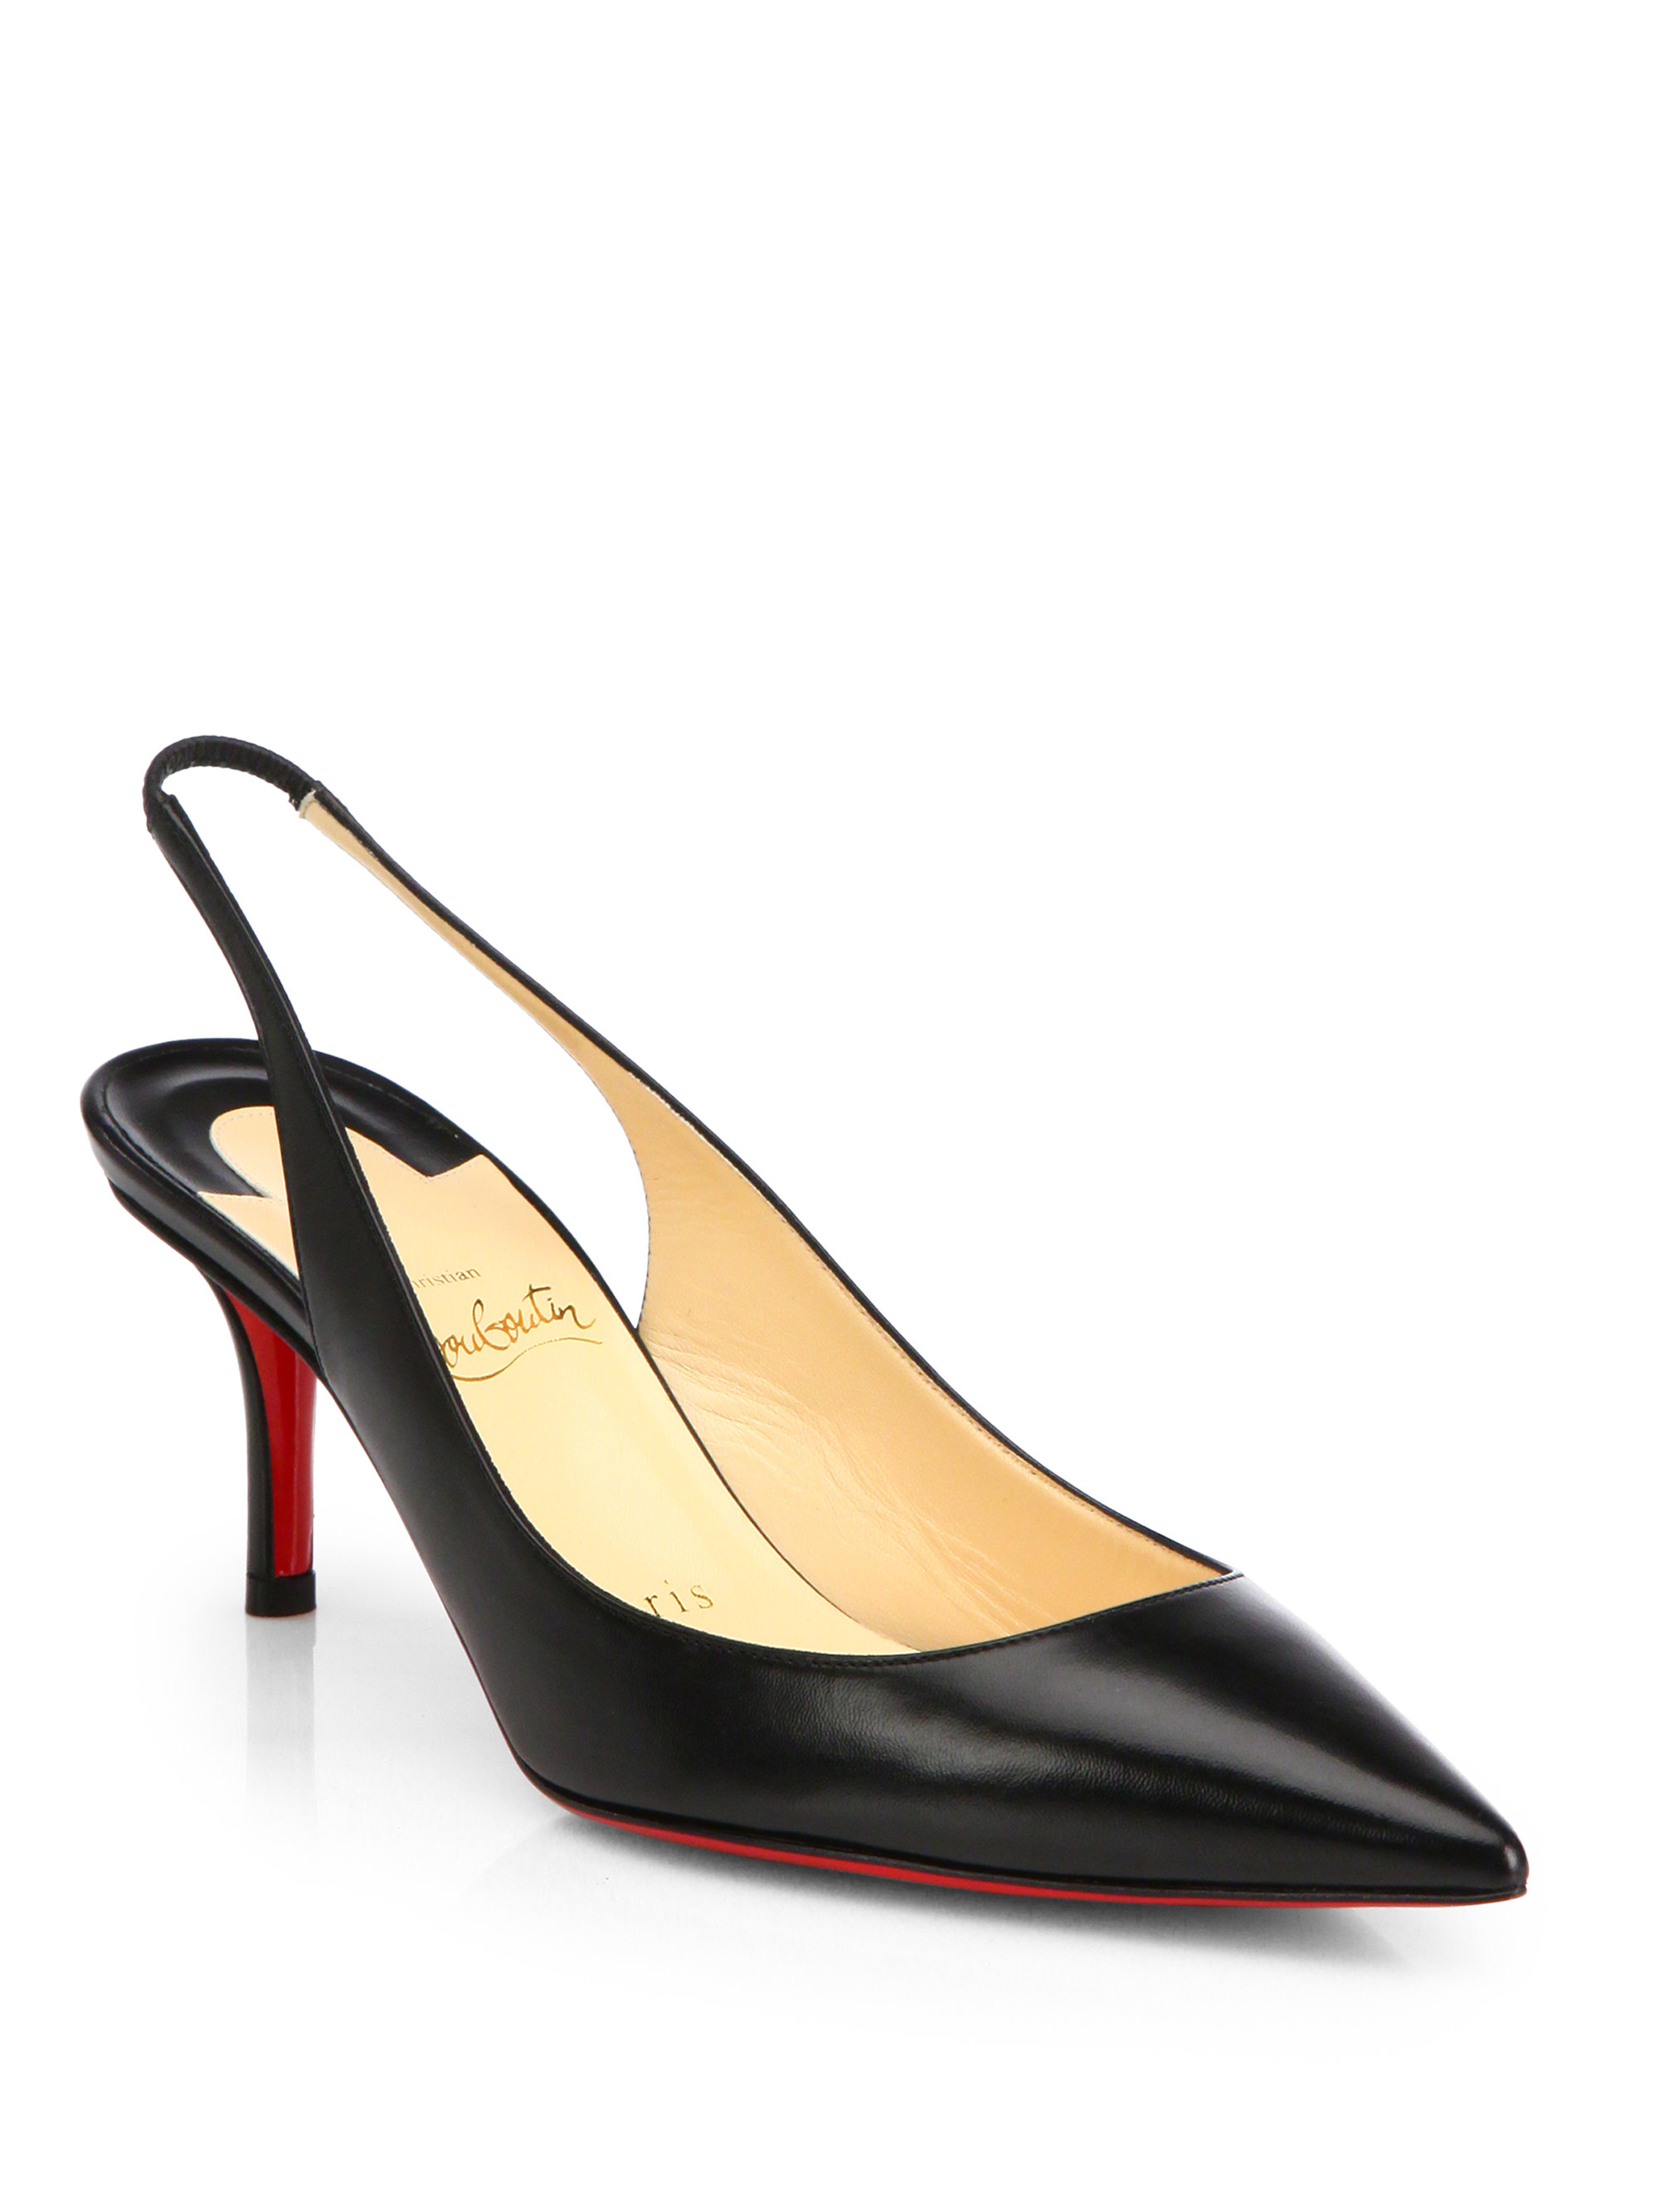 Christian louboutin Apostrophy Leather Slingback Pumps in Black | Lyst